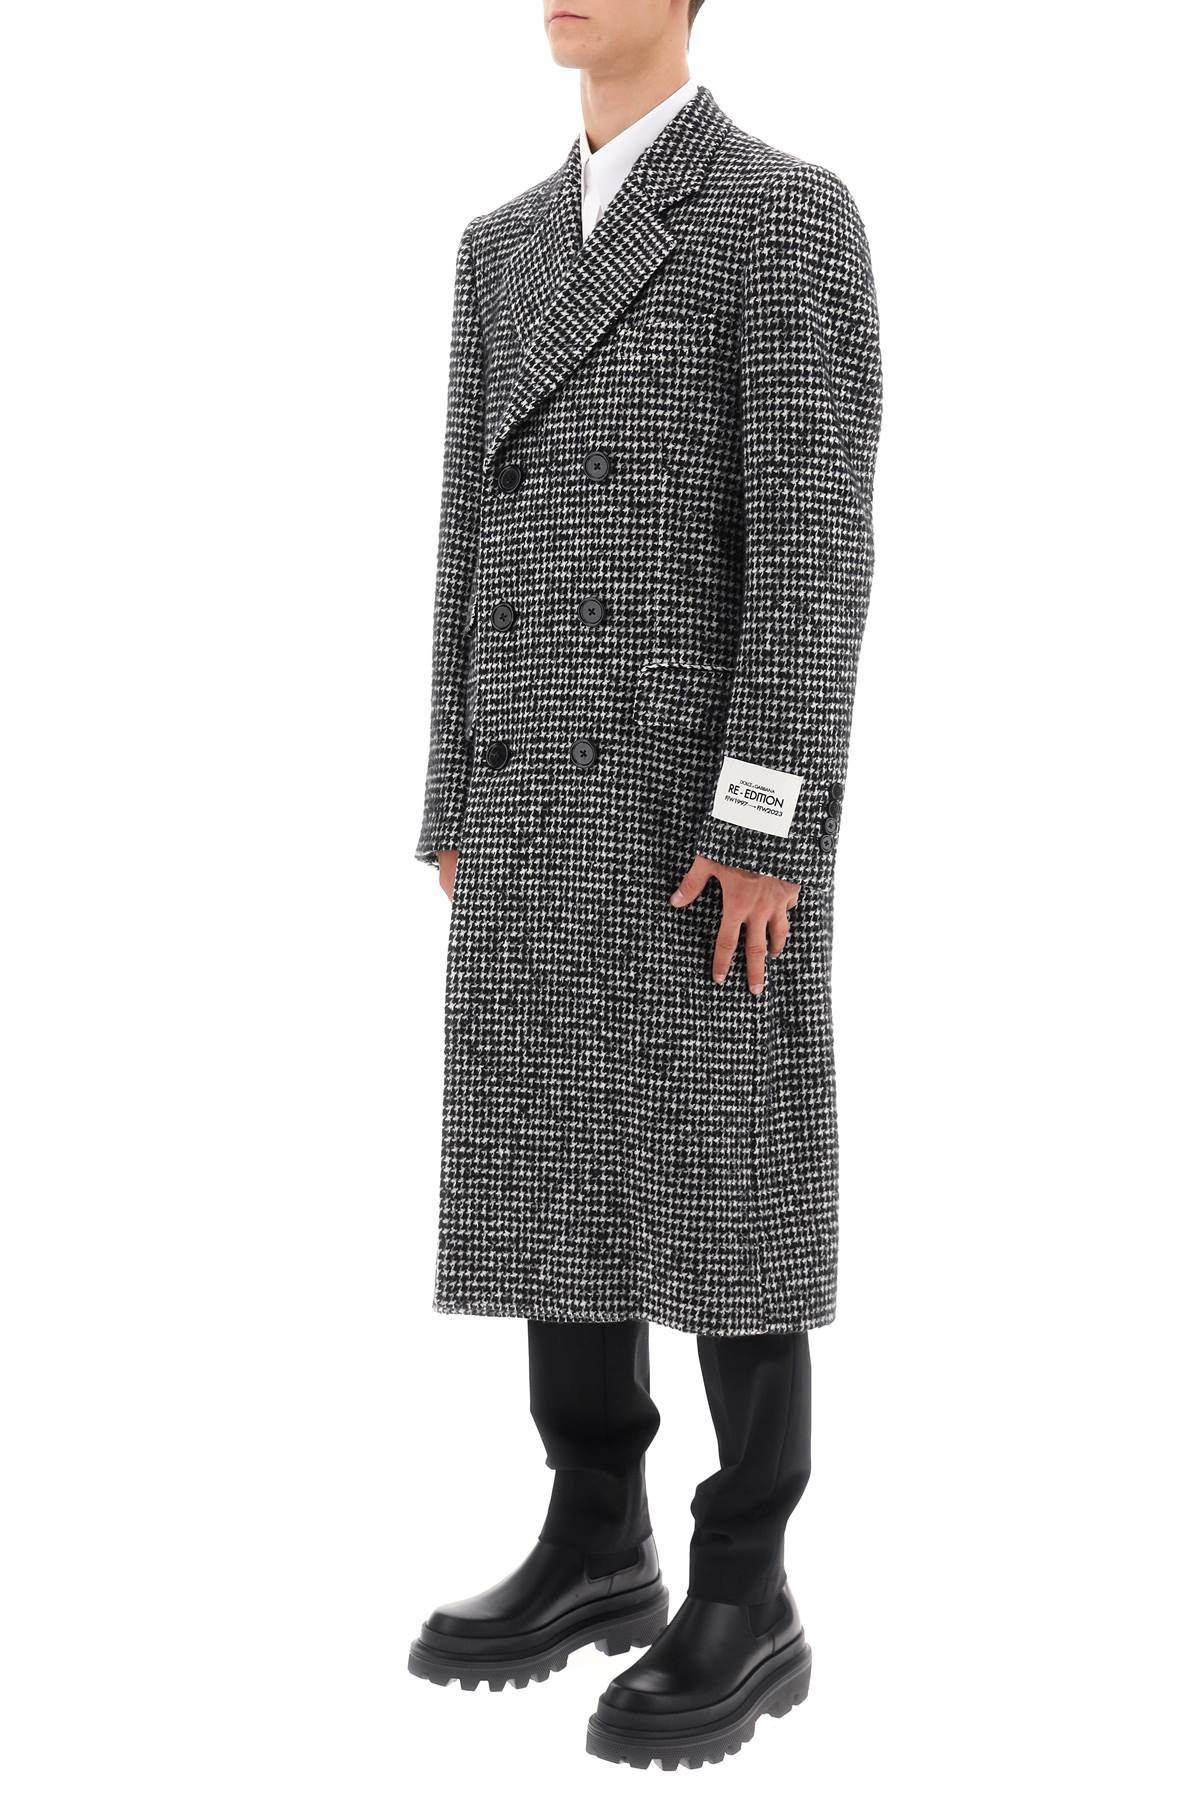 RE-EDITION COAT IN HOUNDSTOOTH WOOL - 5